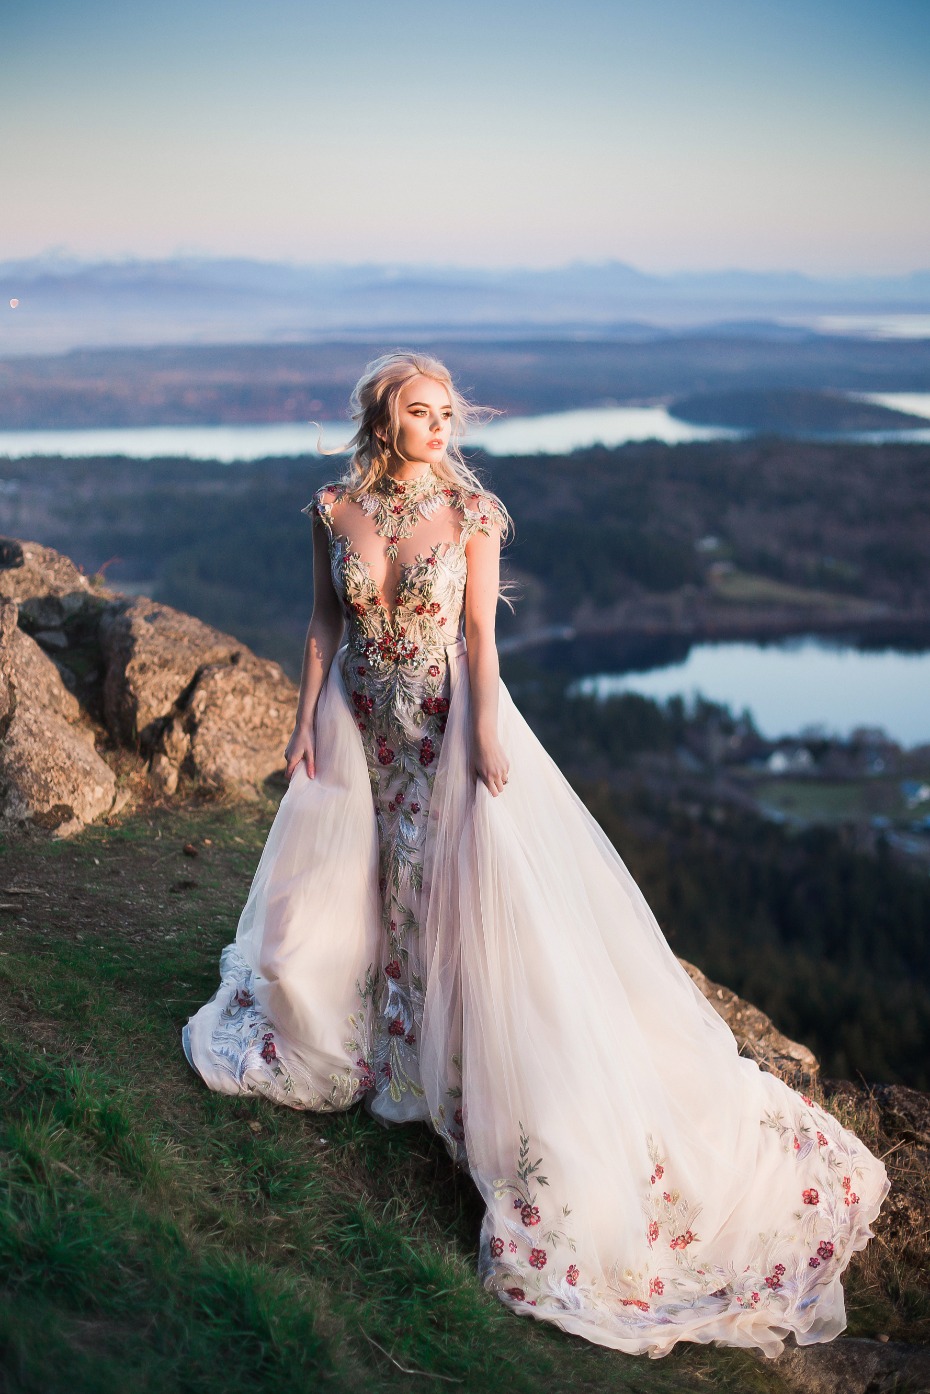 dreamy over the top wedding gown and a view to die for